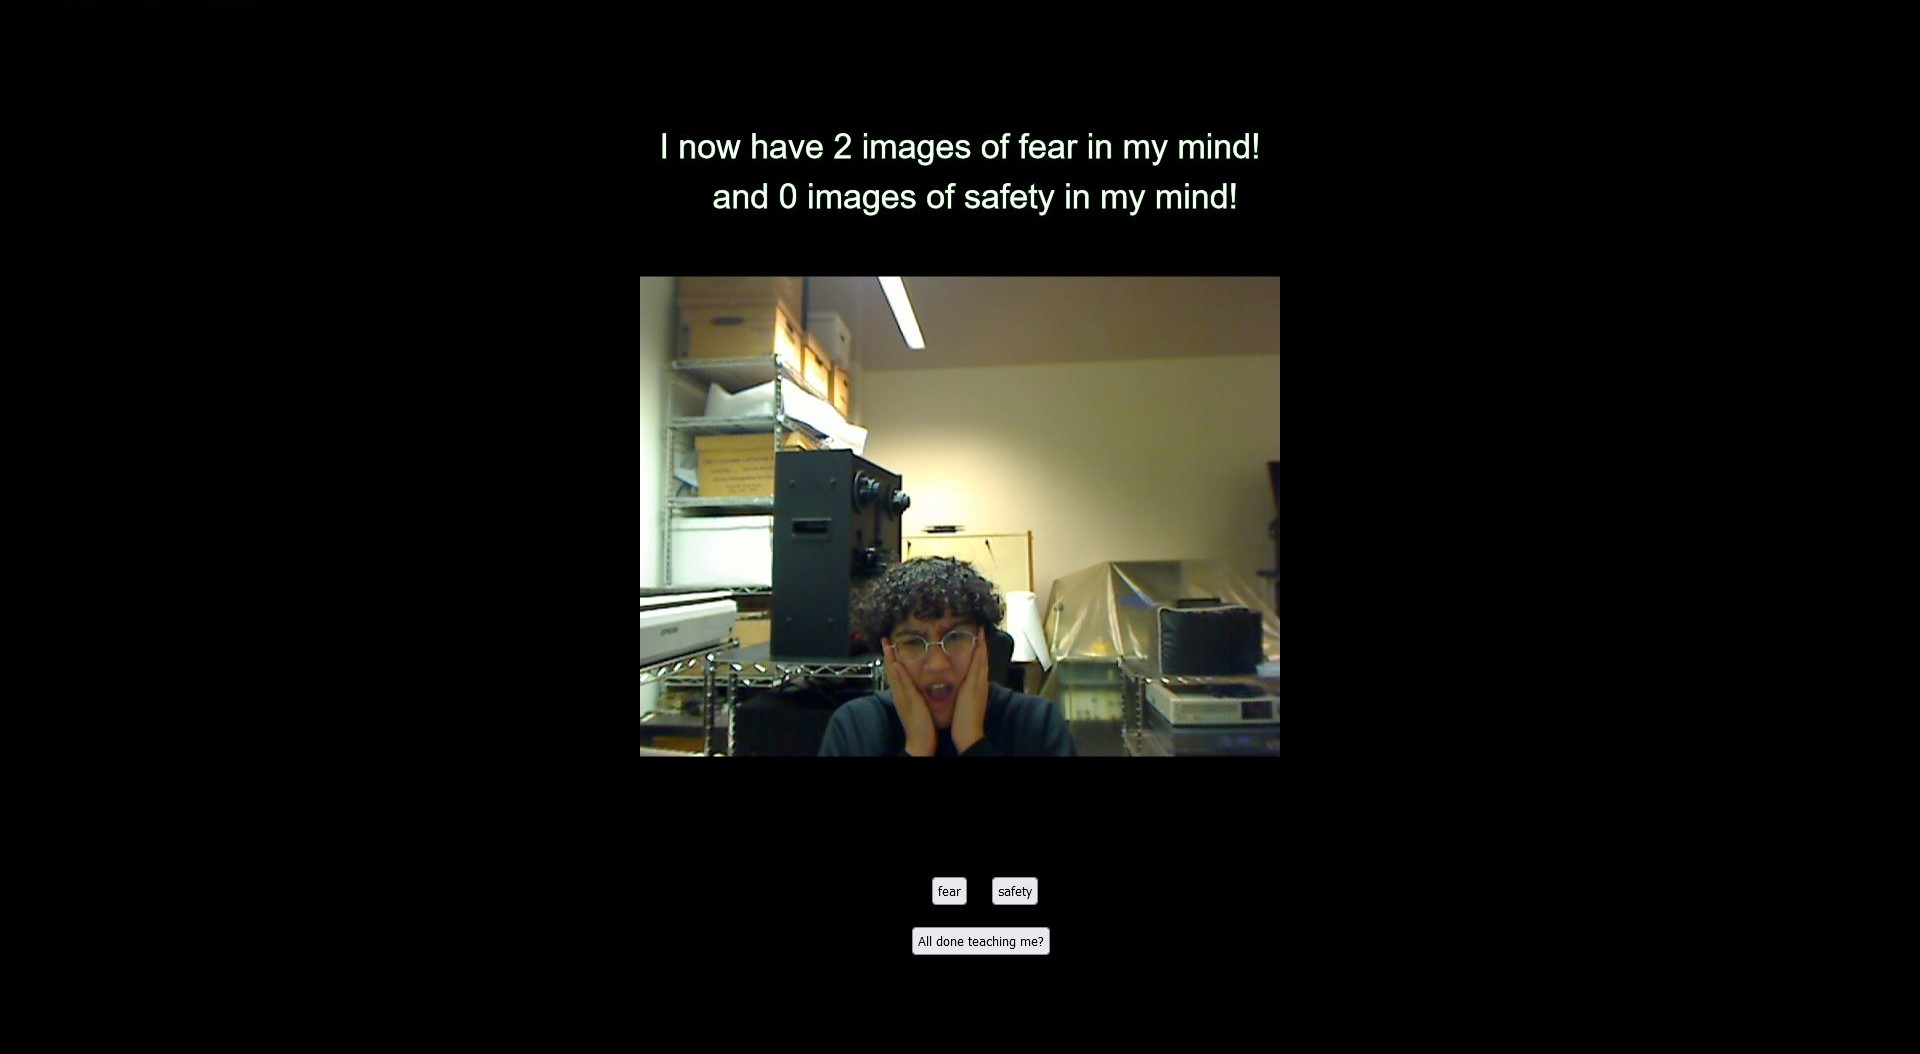 screencap of a webpage featuring webcam feed of a person appearing frightened.